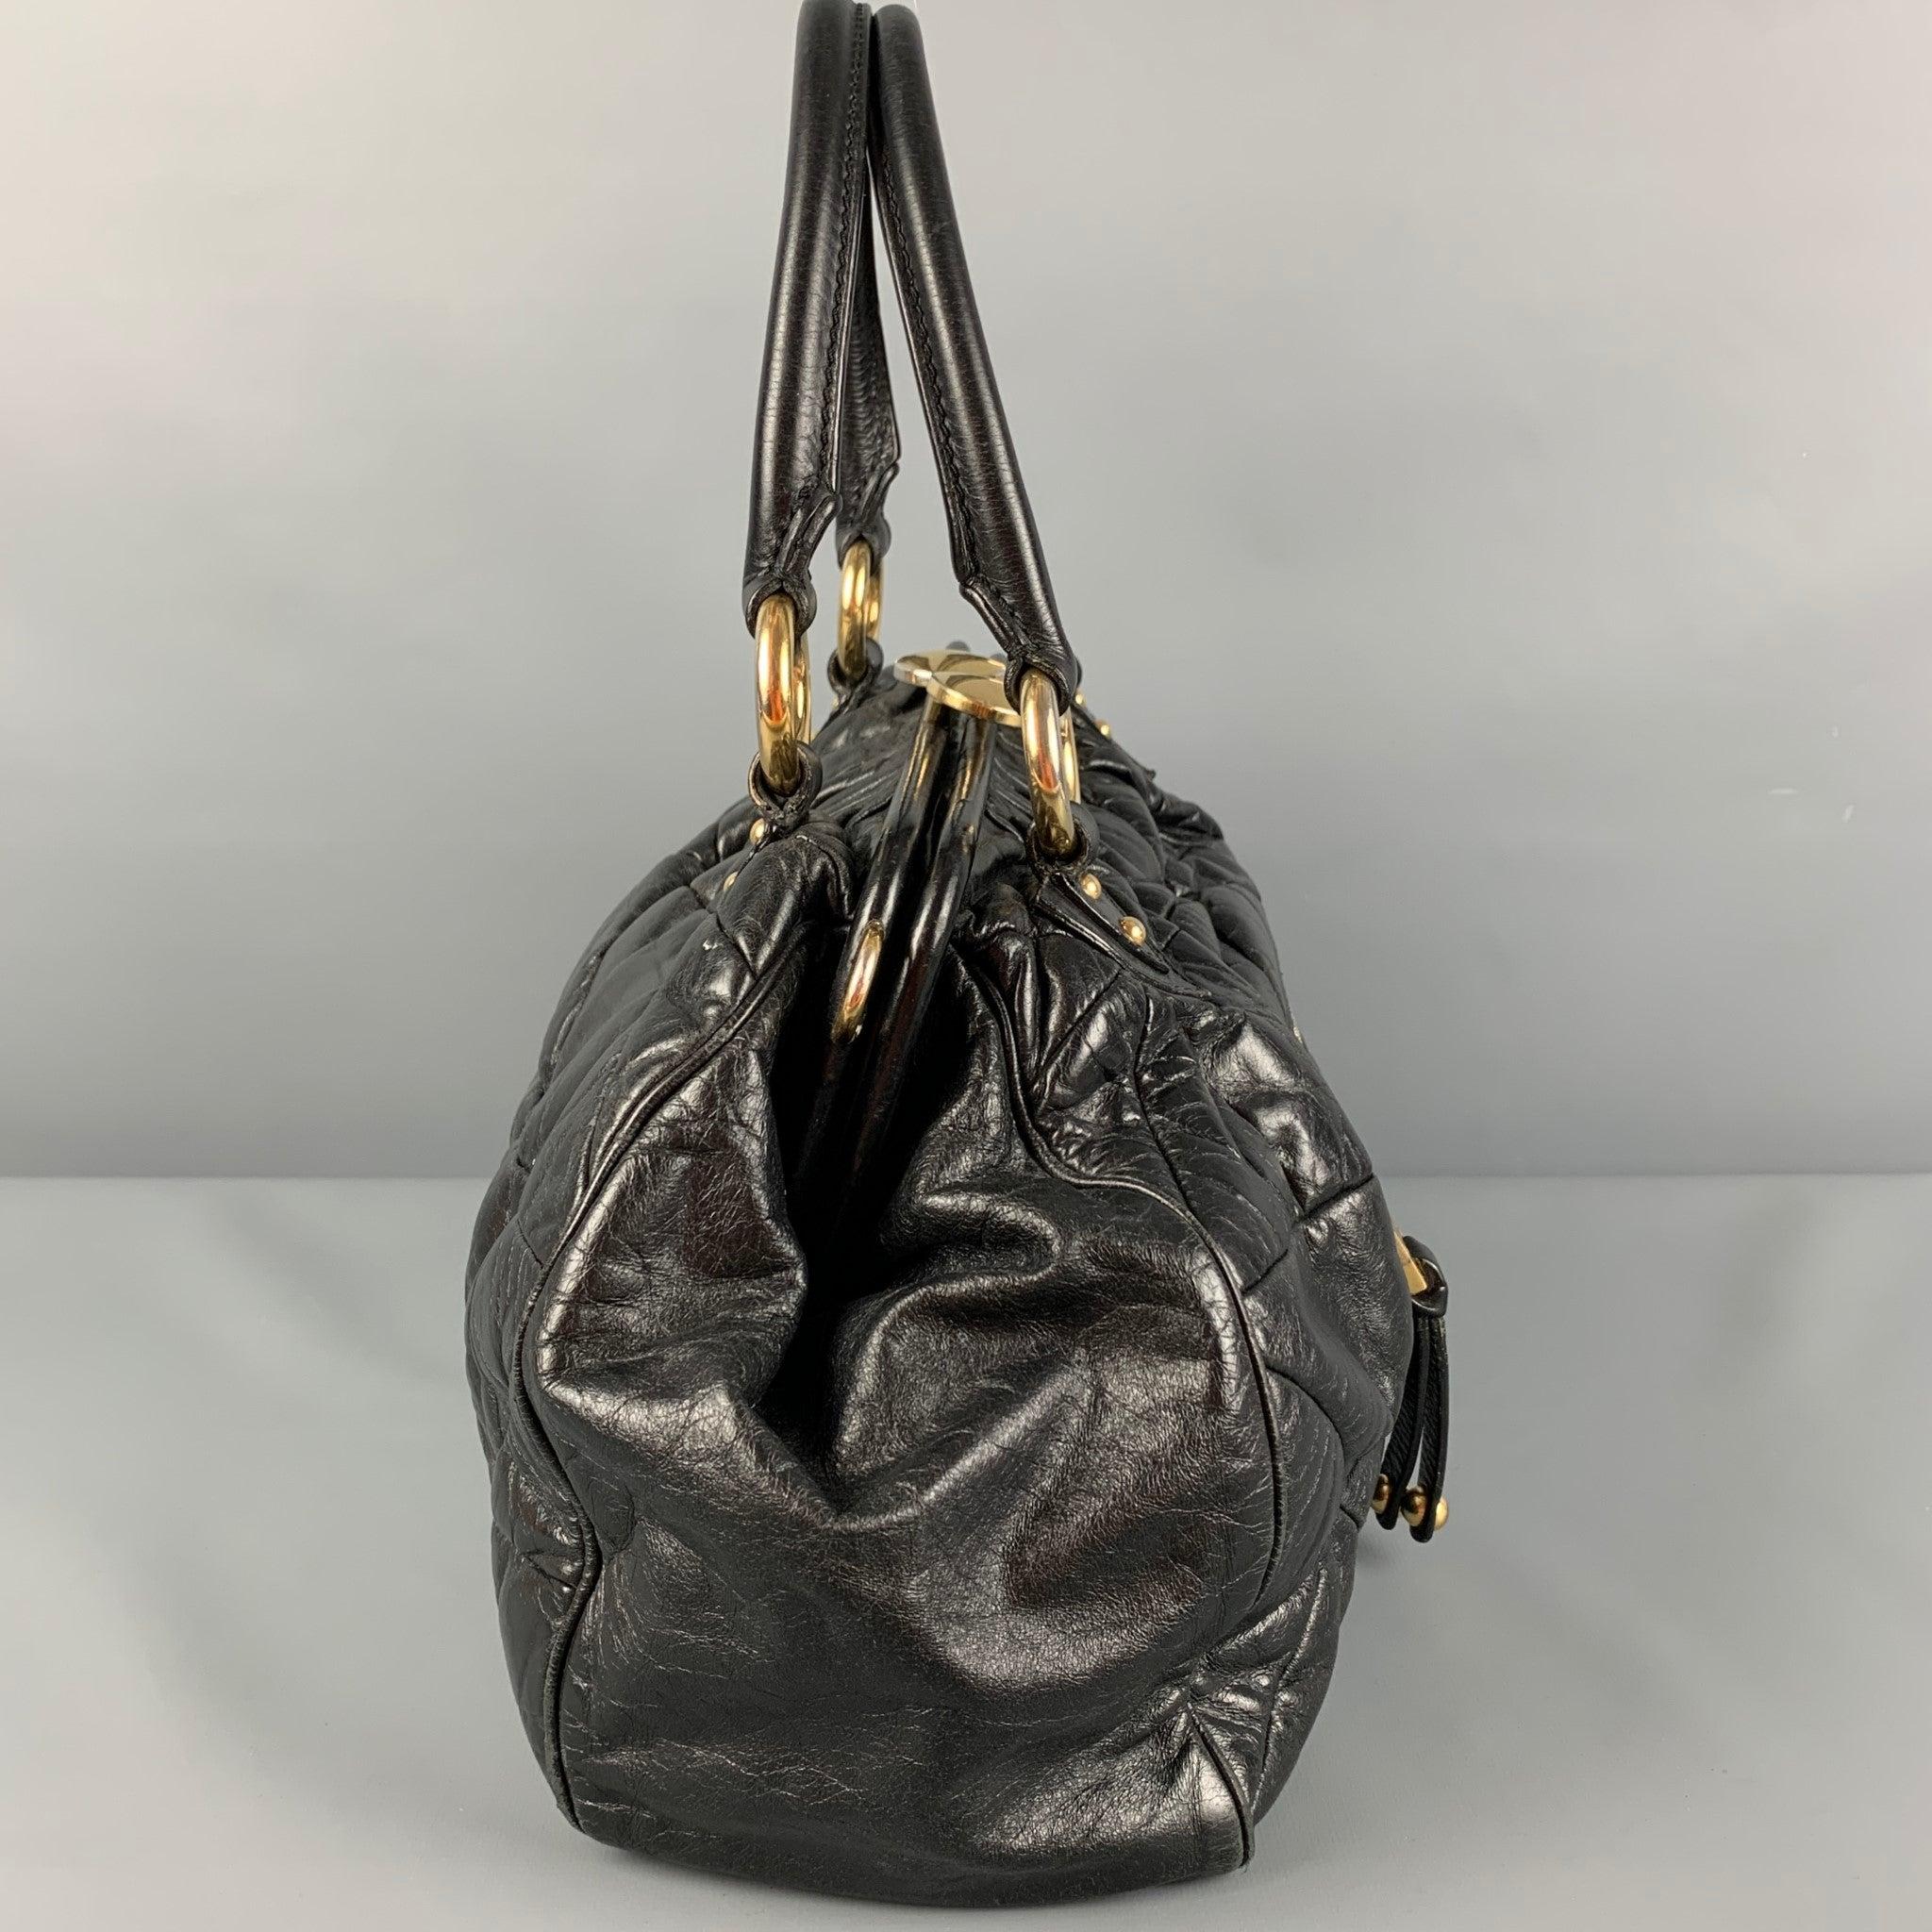 MARC JACOBS 'Stam' bag comes in a black quilted leather featuring top handles, gold tone hardware, front zipper pocket, inner pocket, and a kiss-lock closure.
Good
Pre-Owned Condition. Moderate wear. Missing strap. As-Is.  

Measurements: 
  Length: